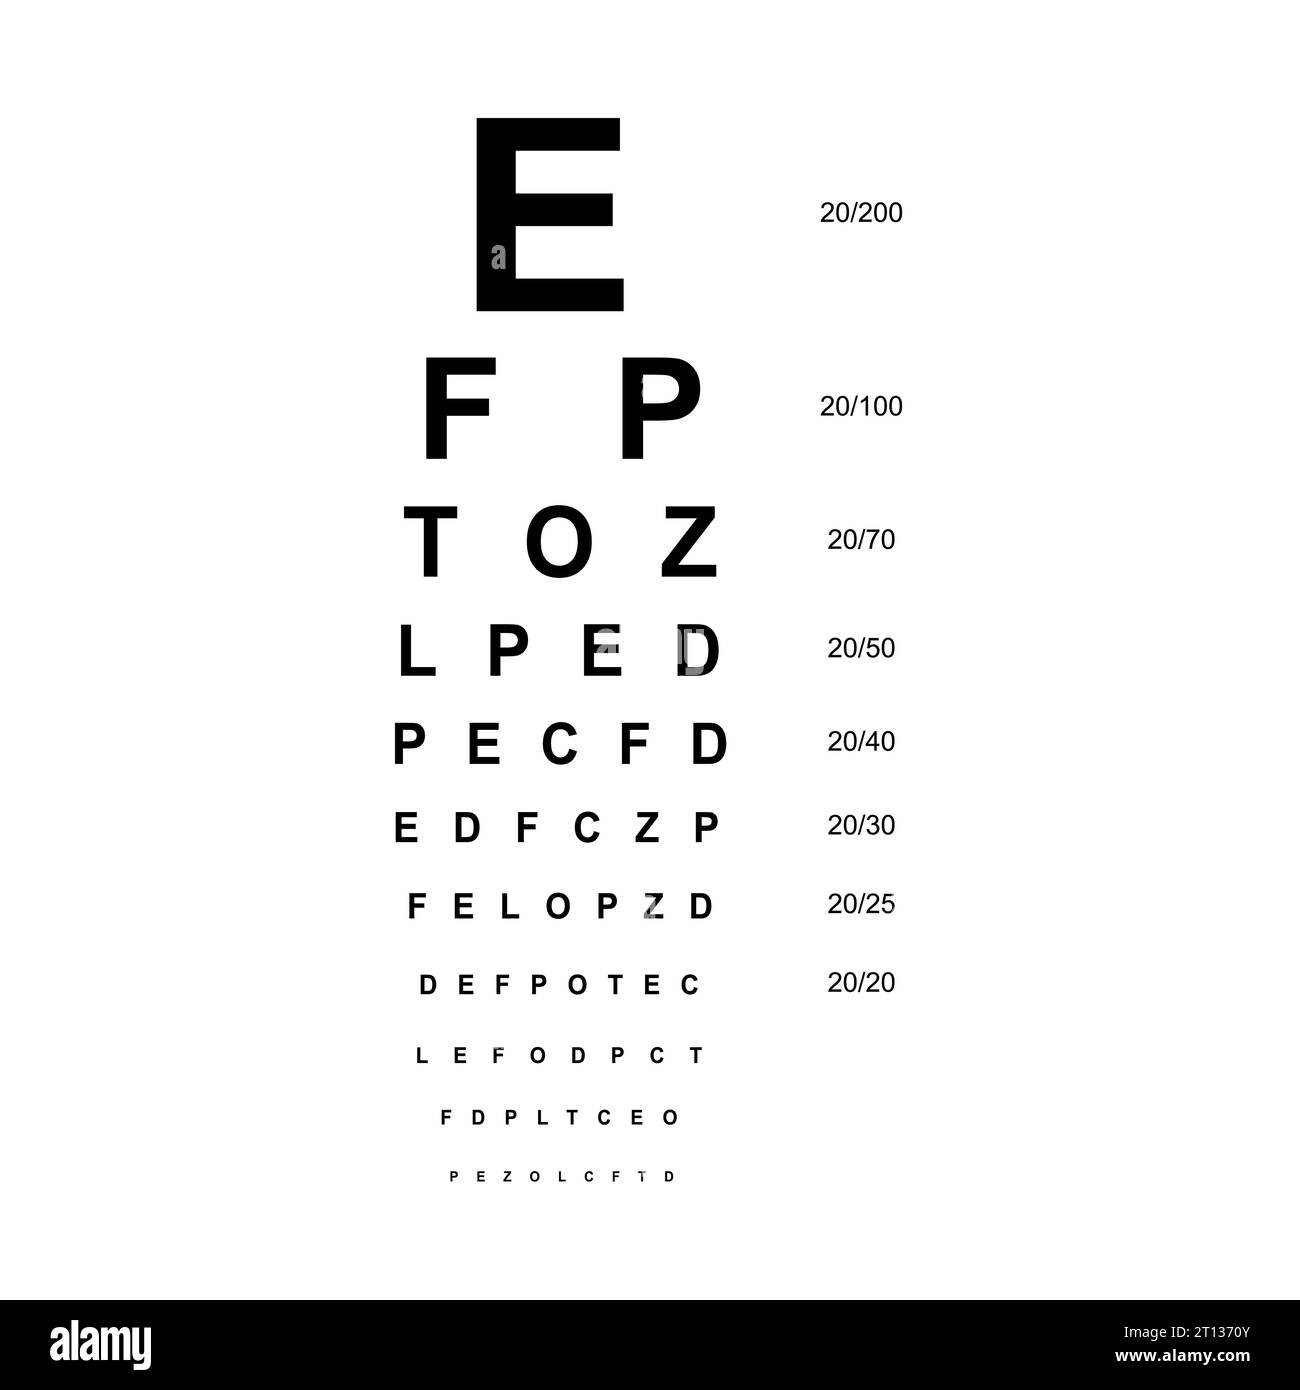 Snellen chart - American Academy of Ophthalmology